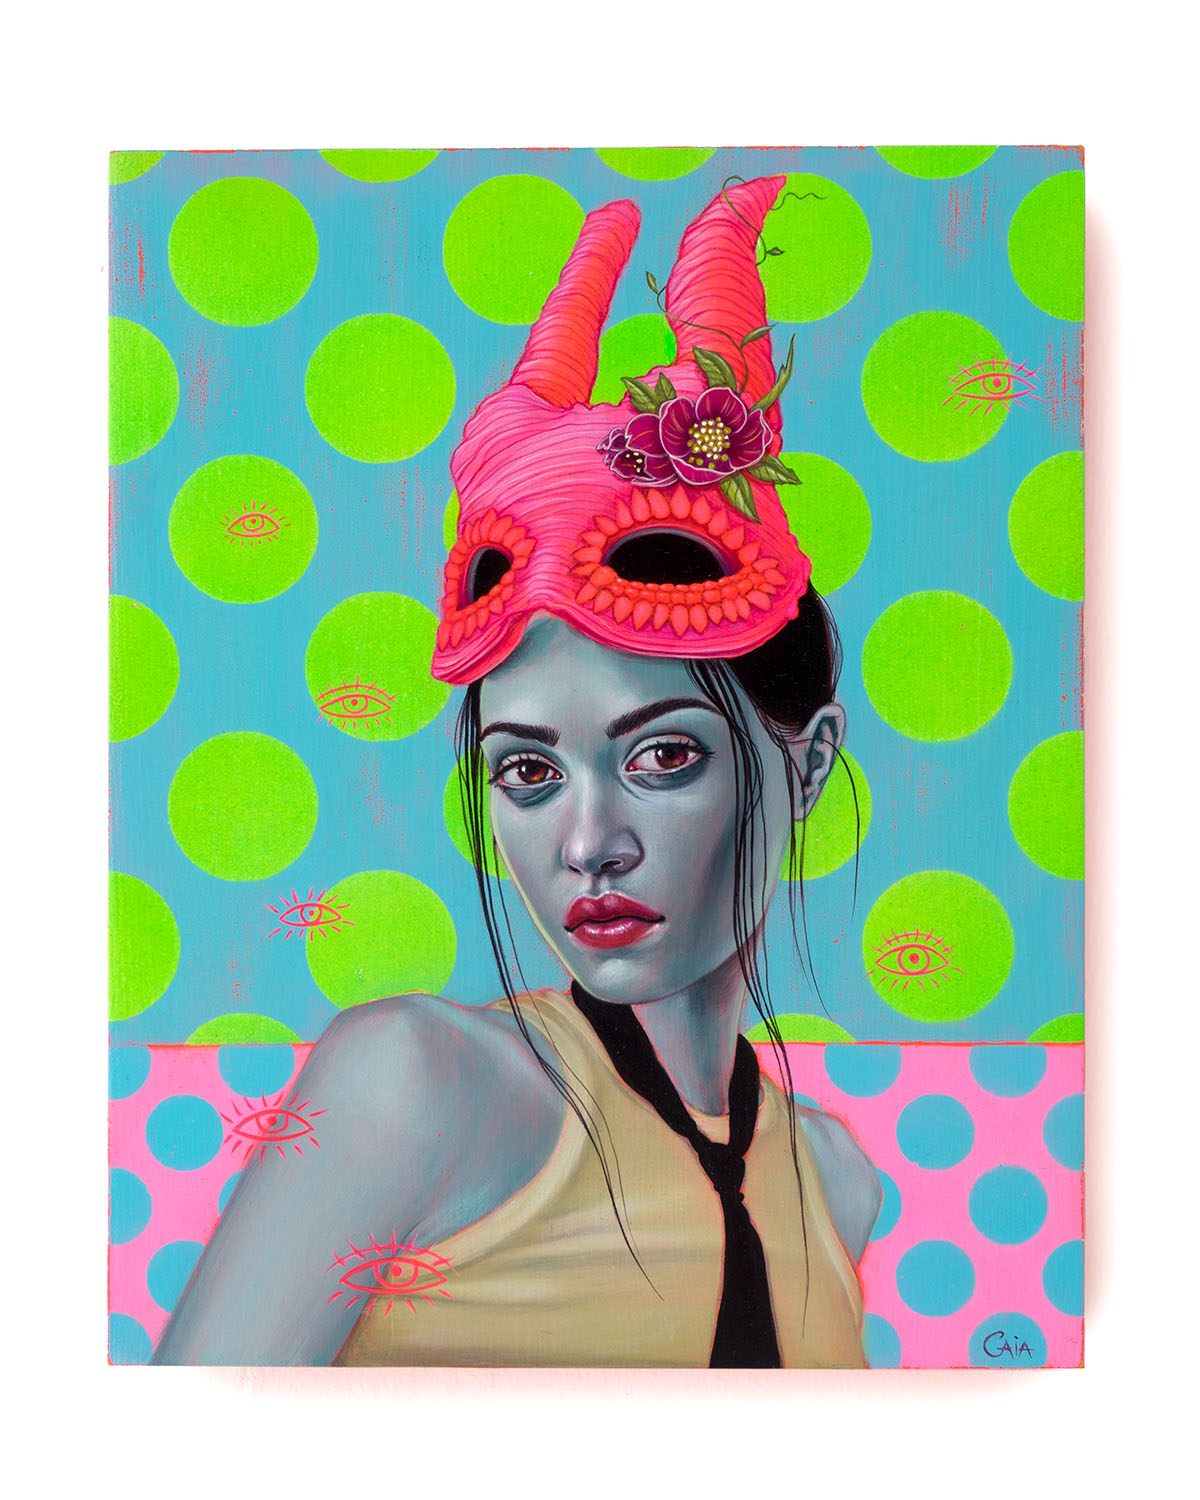 fluorescent color portrait of a woman wearing a pink horned mask and a black tie and sleeveless top in front of a background of green spots on blue and blue spots on pink and scattered red eye outline symbols.